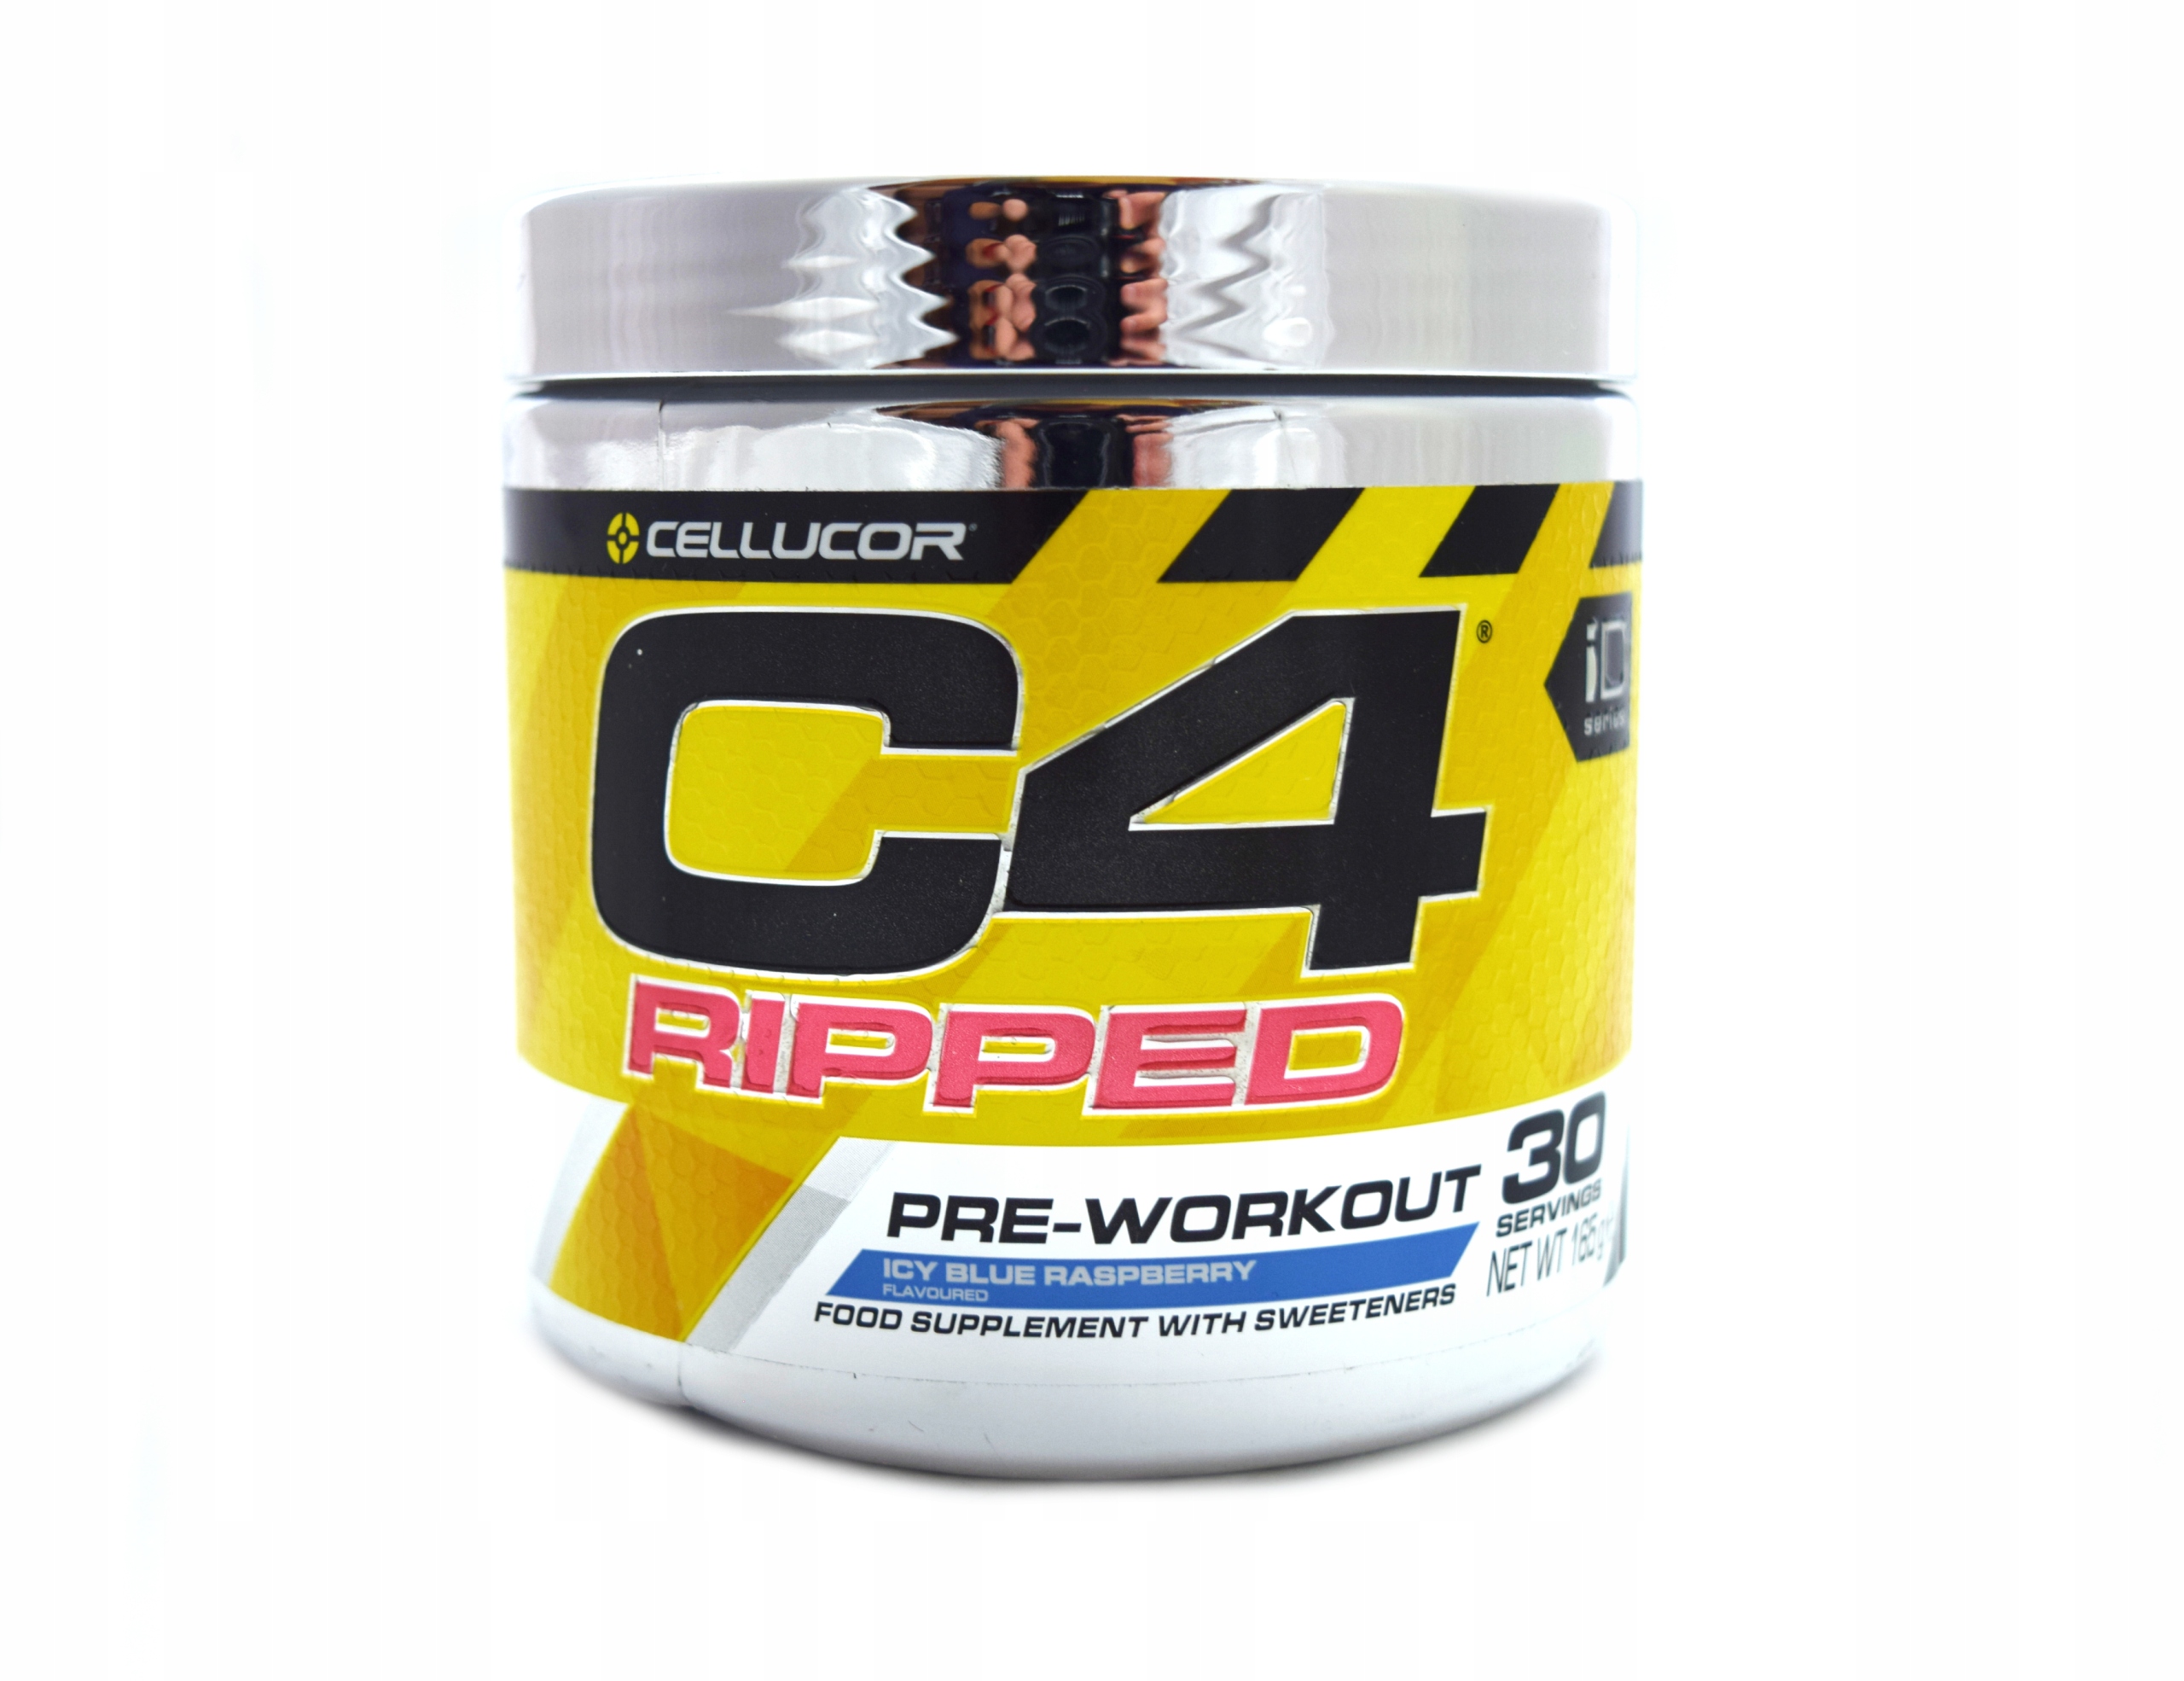 Cellucor C4 Ripped 189g PRE TRÉNING SHREDED ENERGY